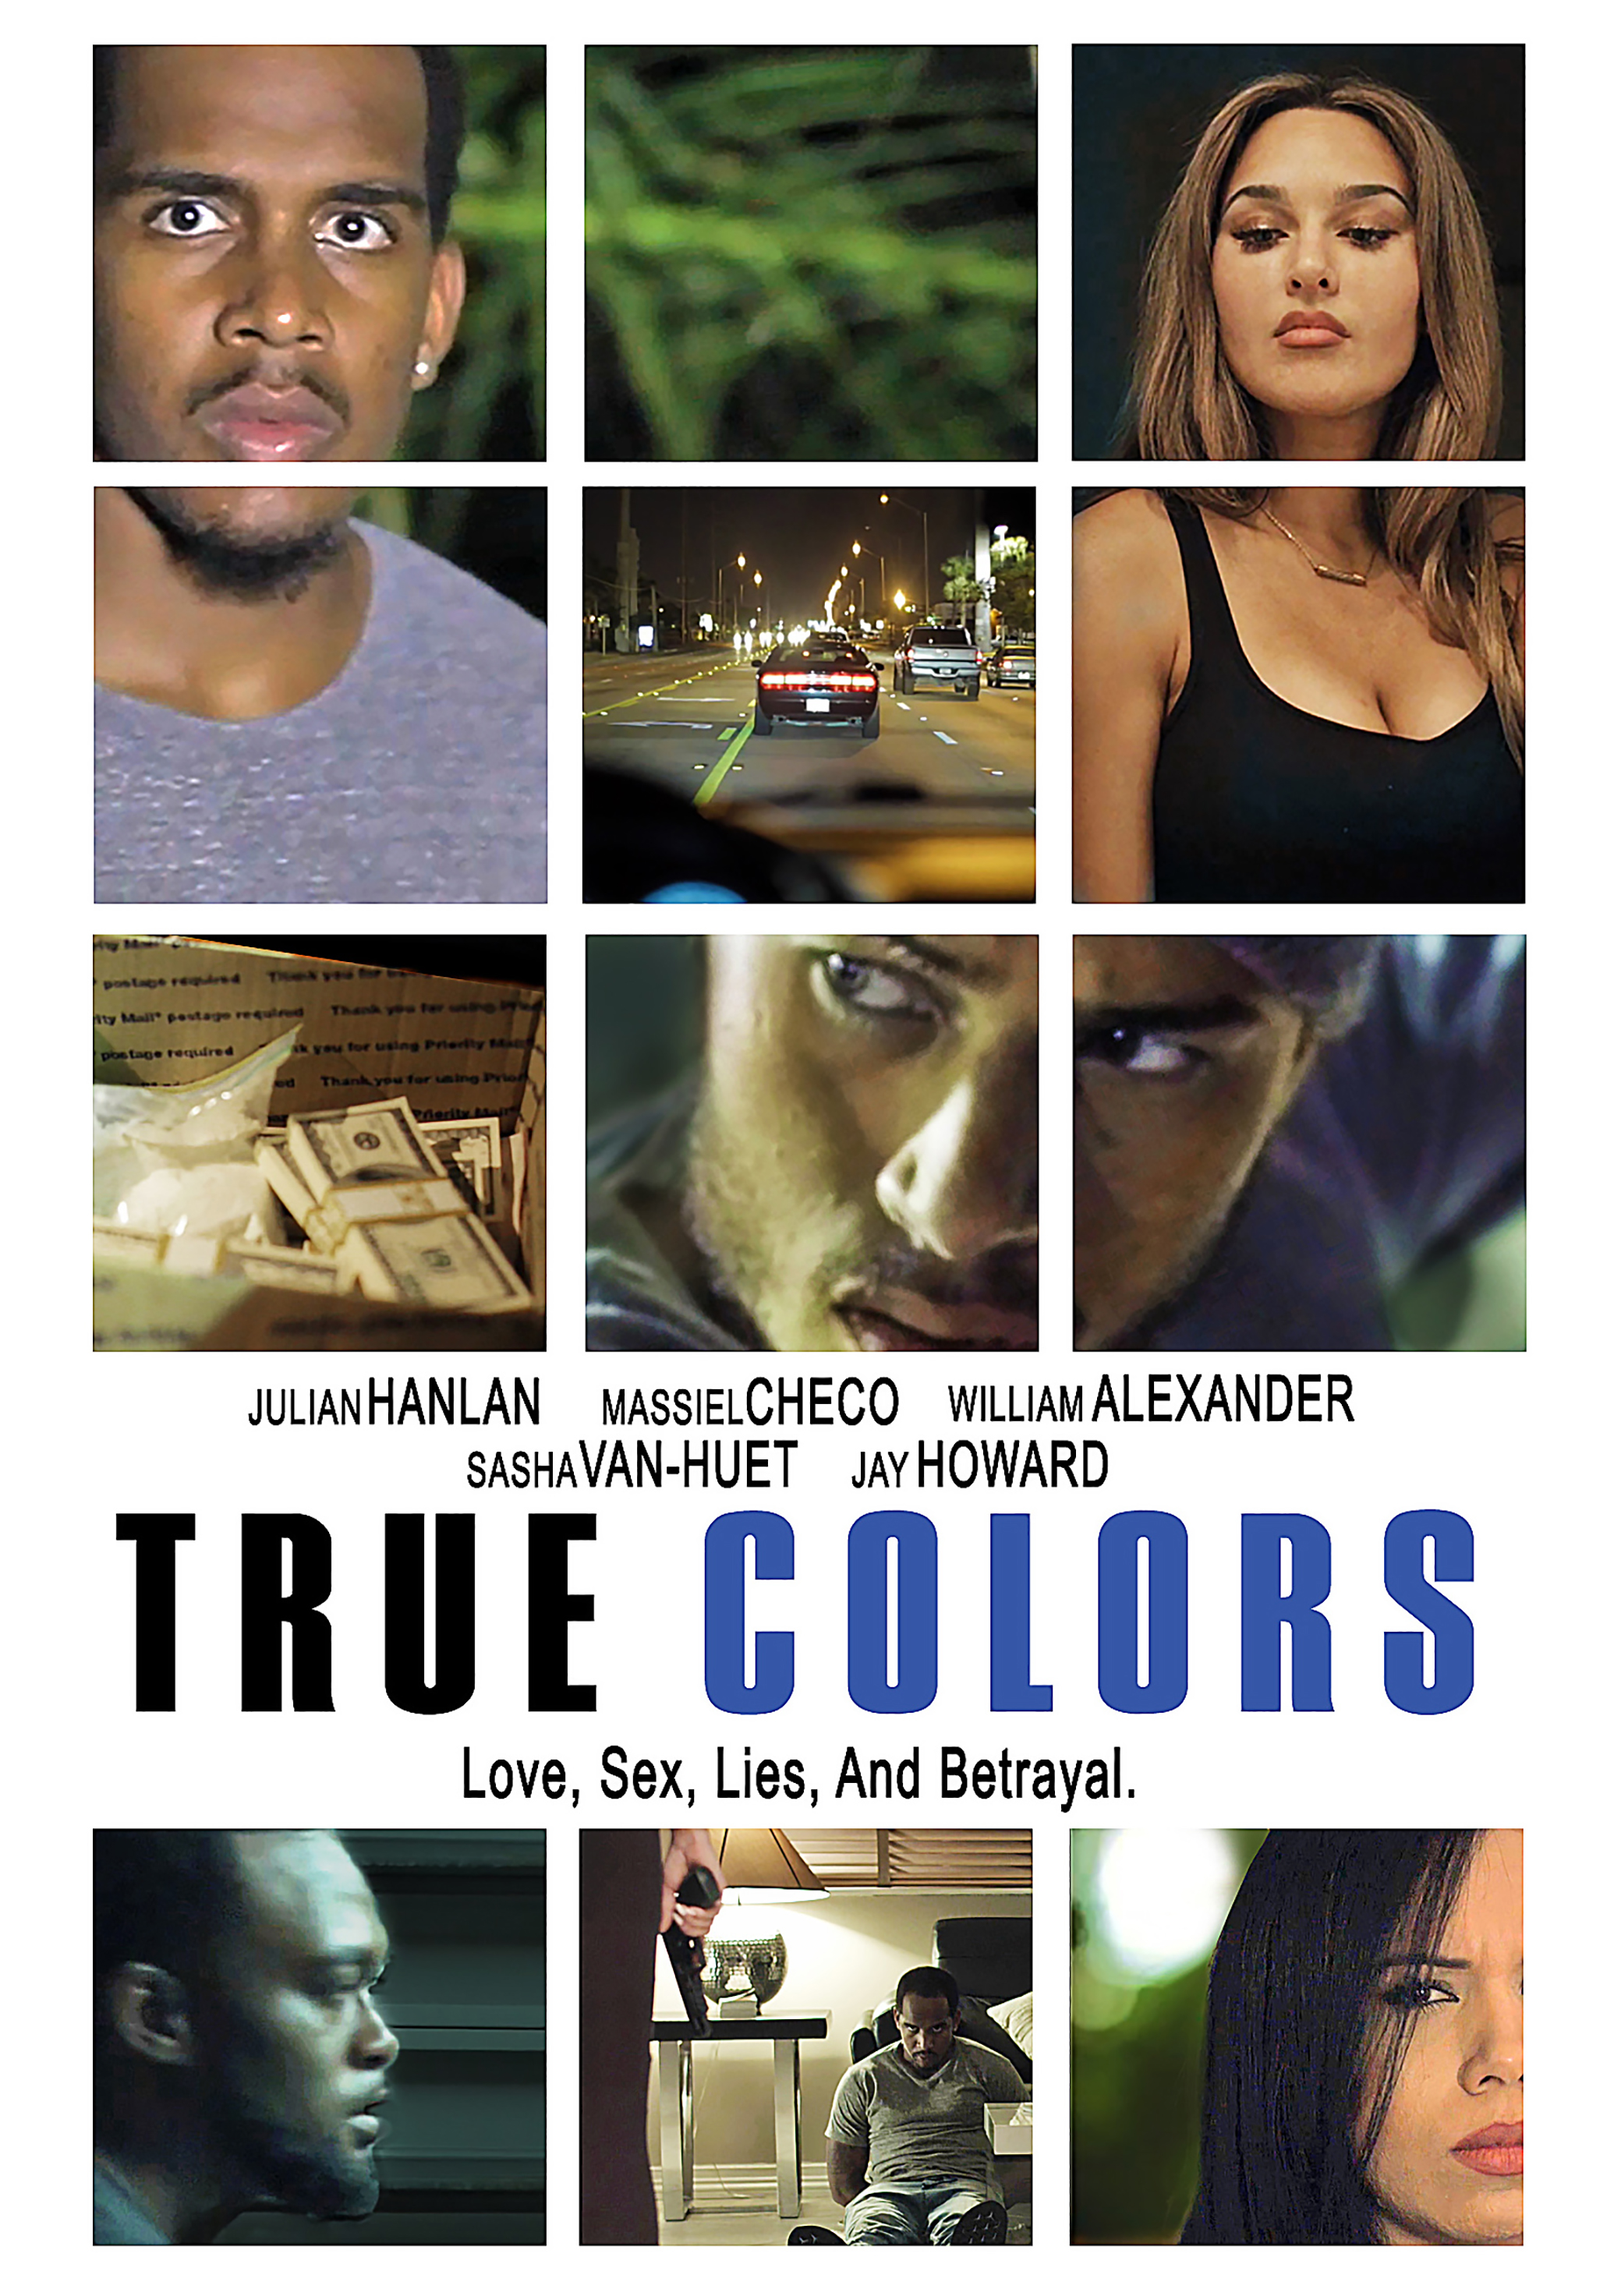 True Colors (2016) Thriller, Directed By Chrys Calixte pic